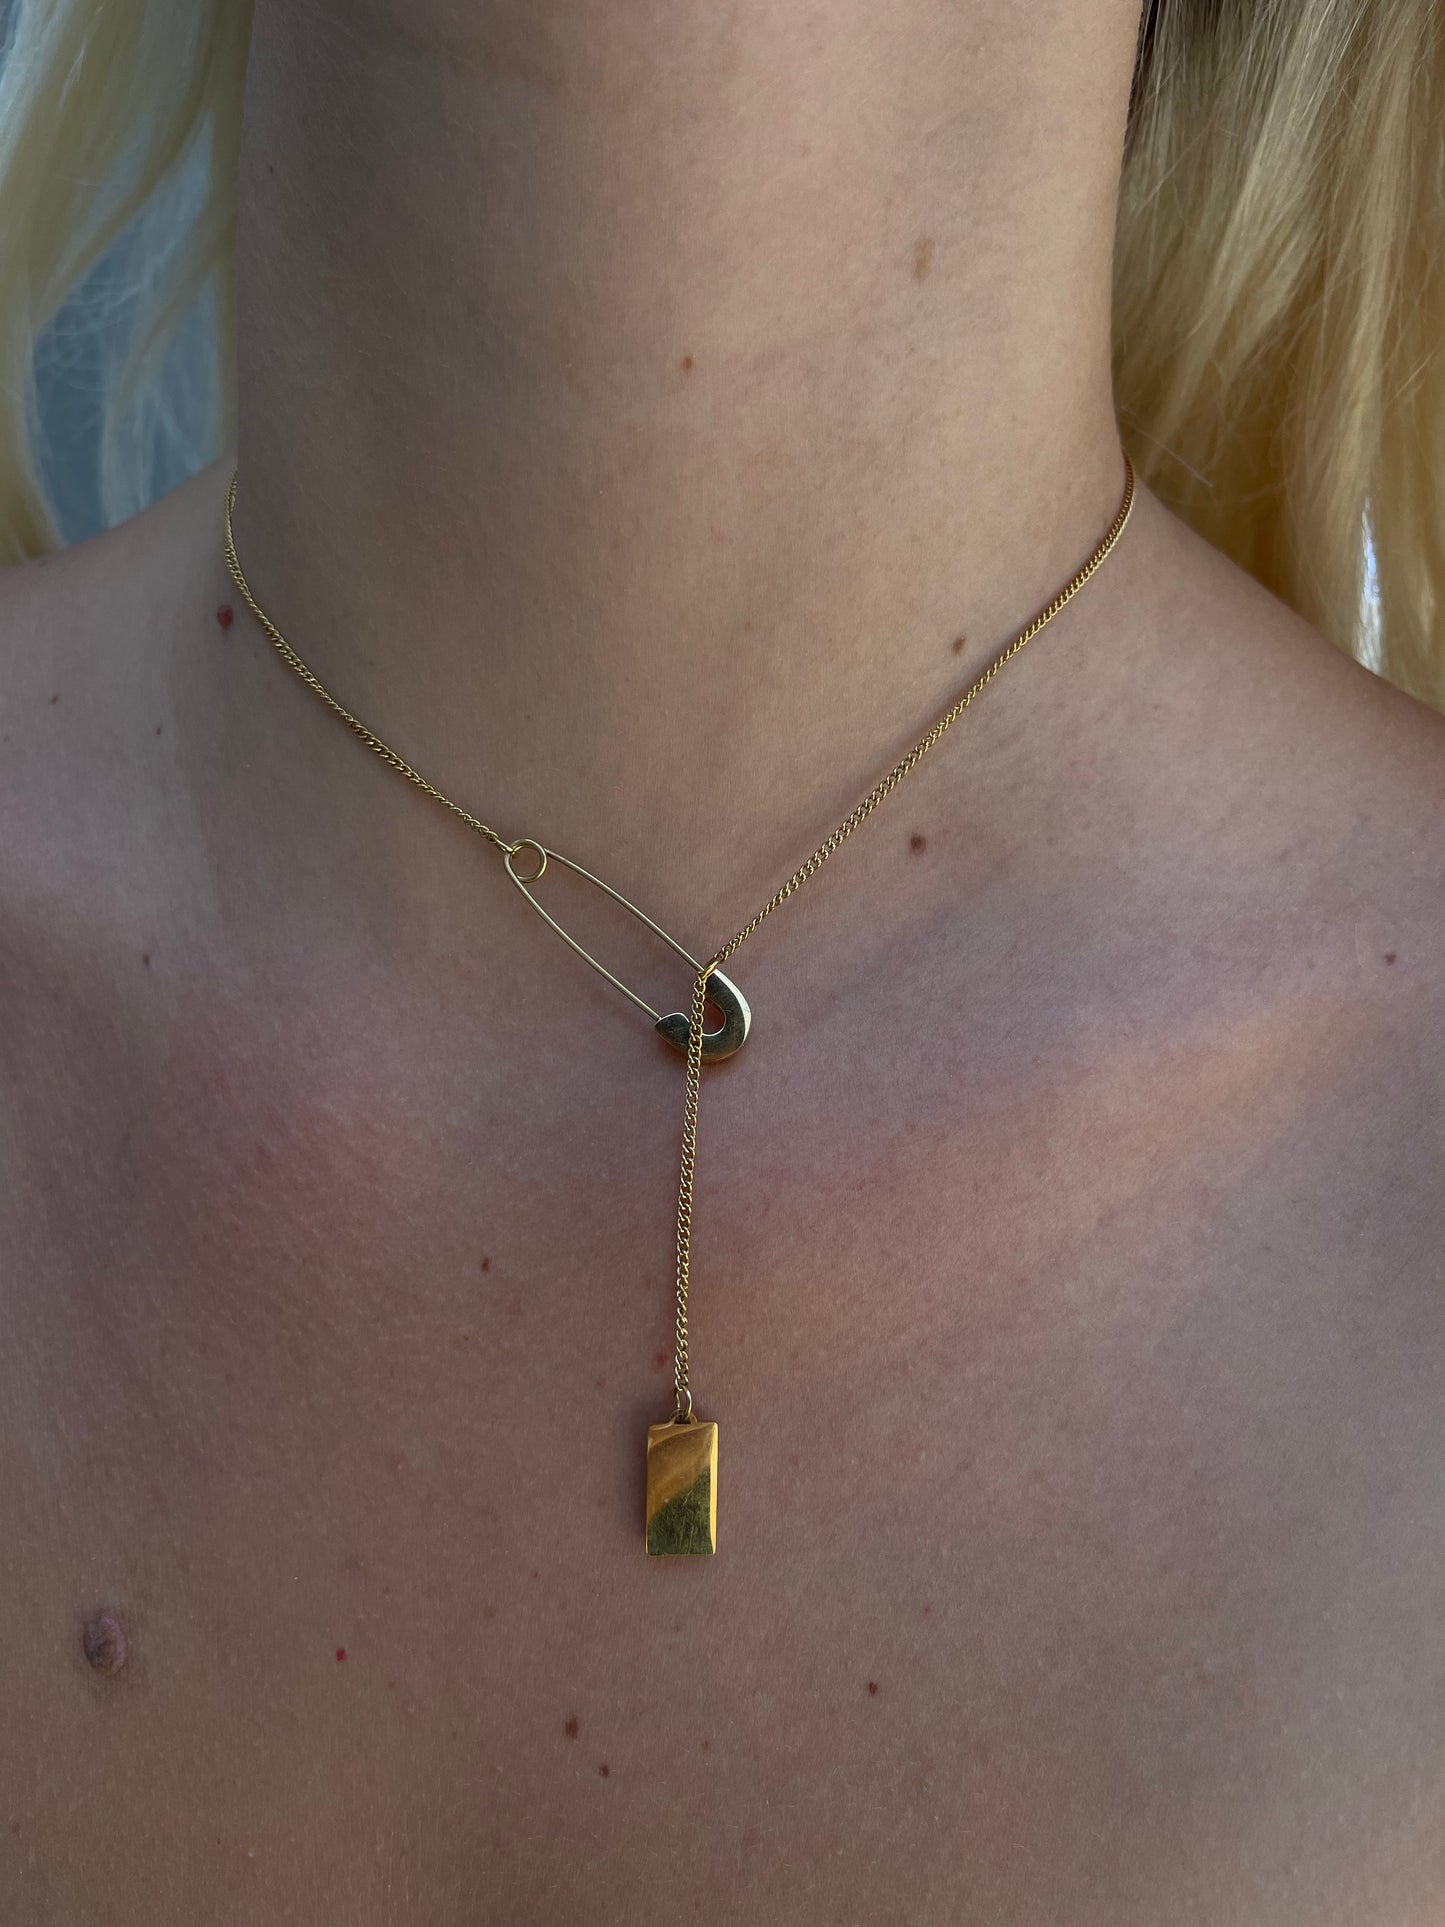 Pin necklace